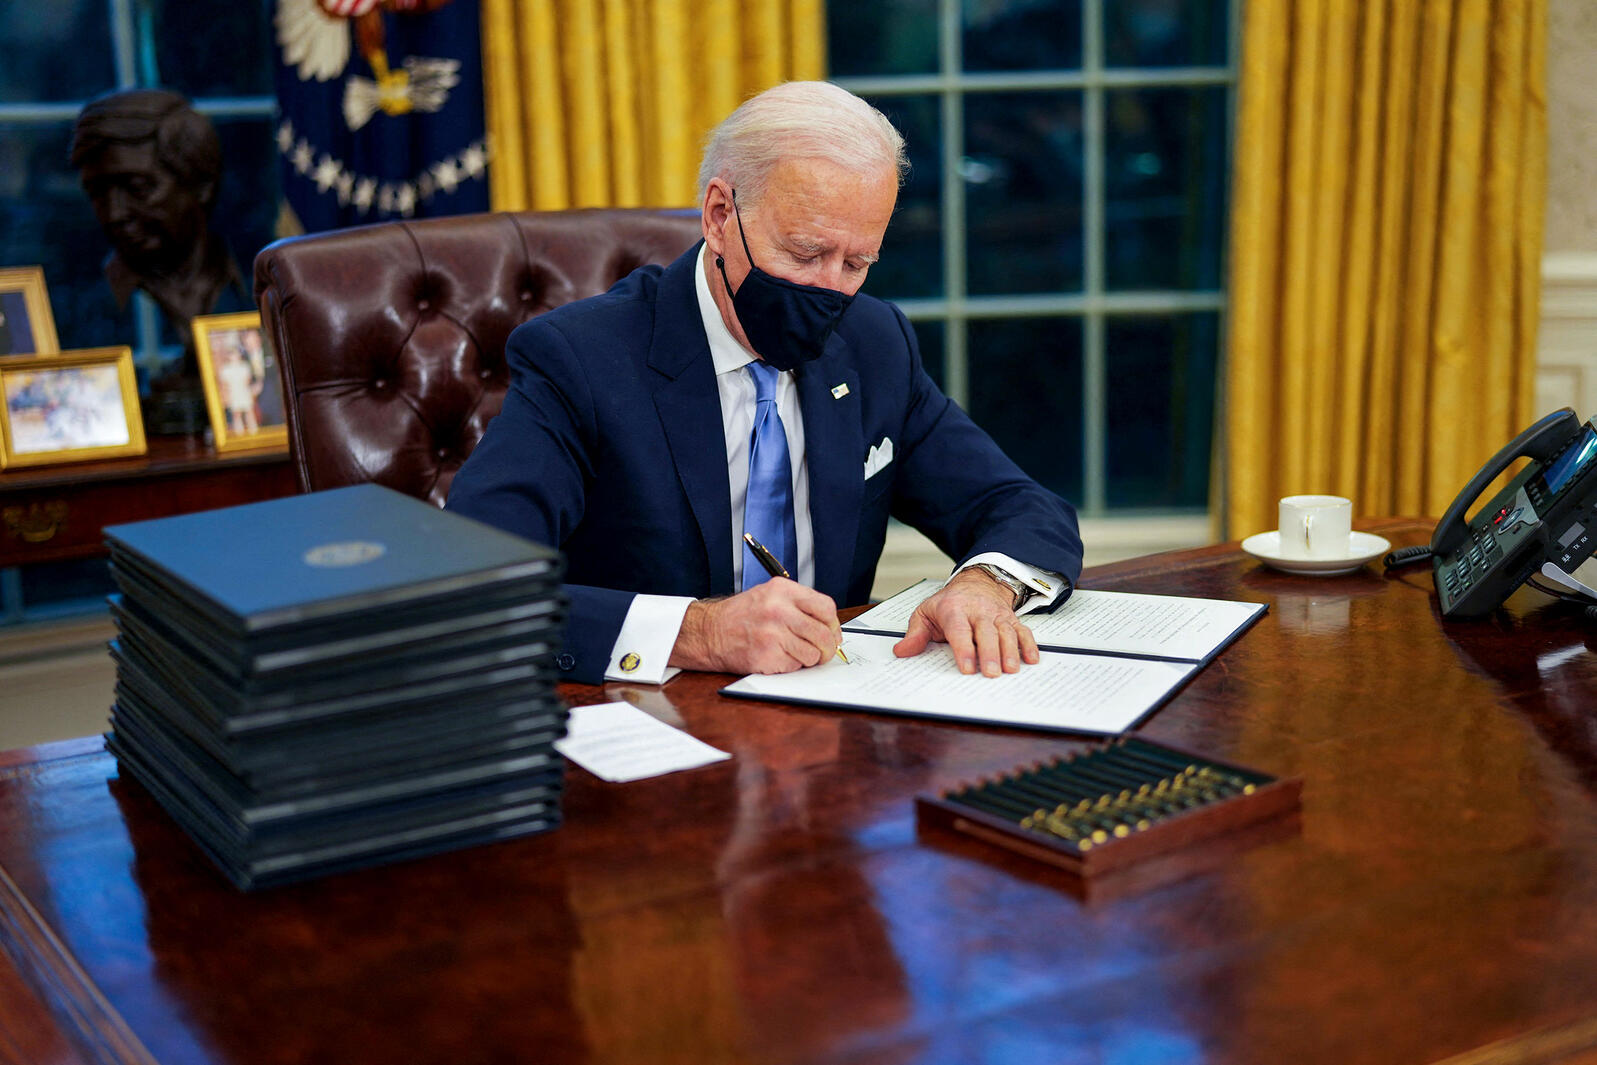 Biden’s occupational licensing executive order should inspire state lawmakers